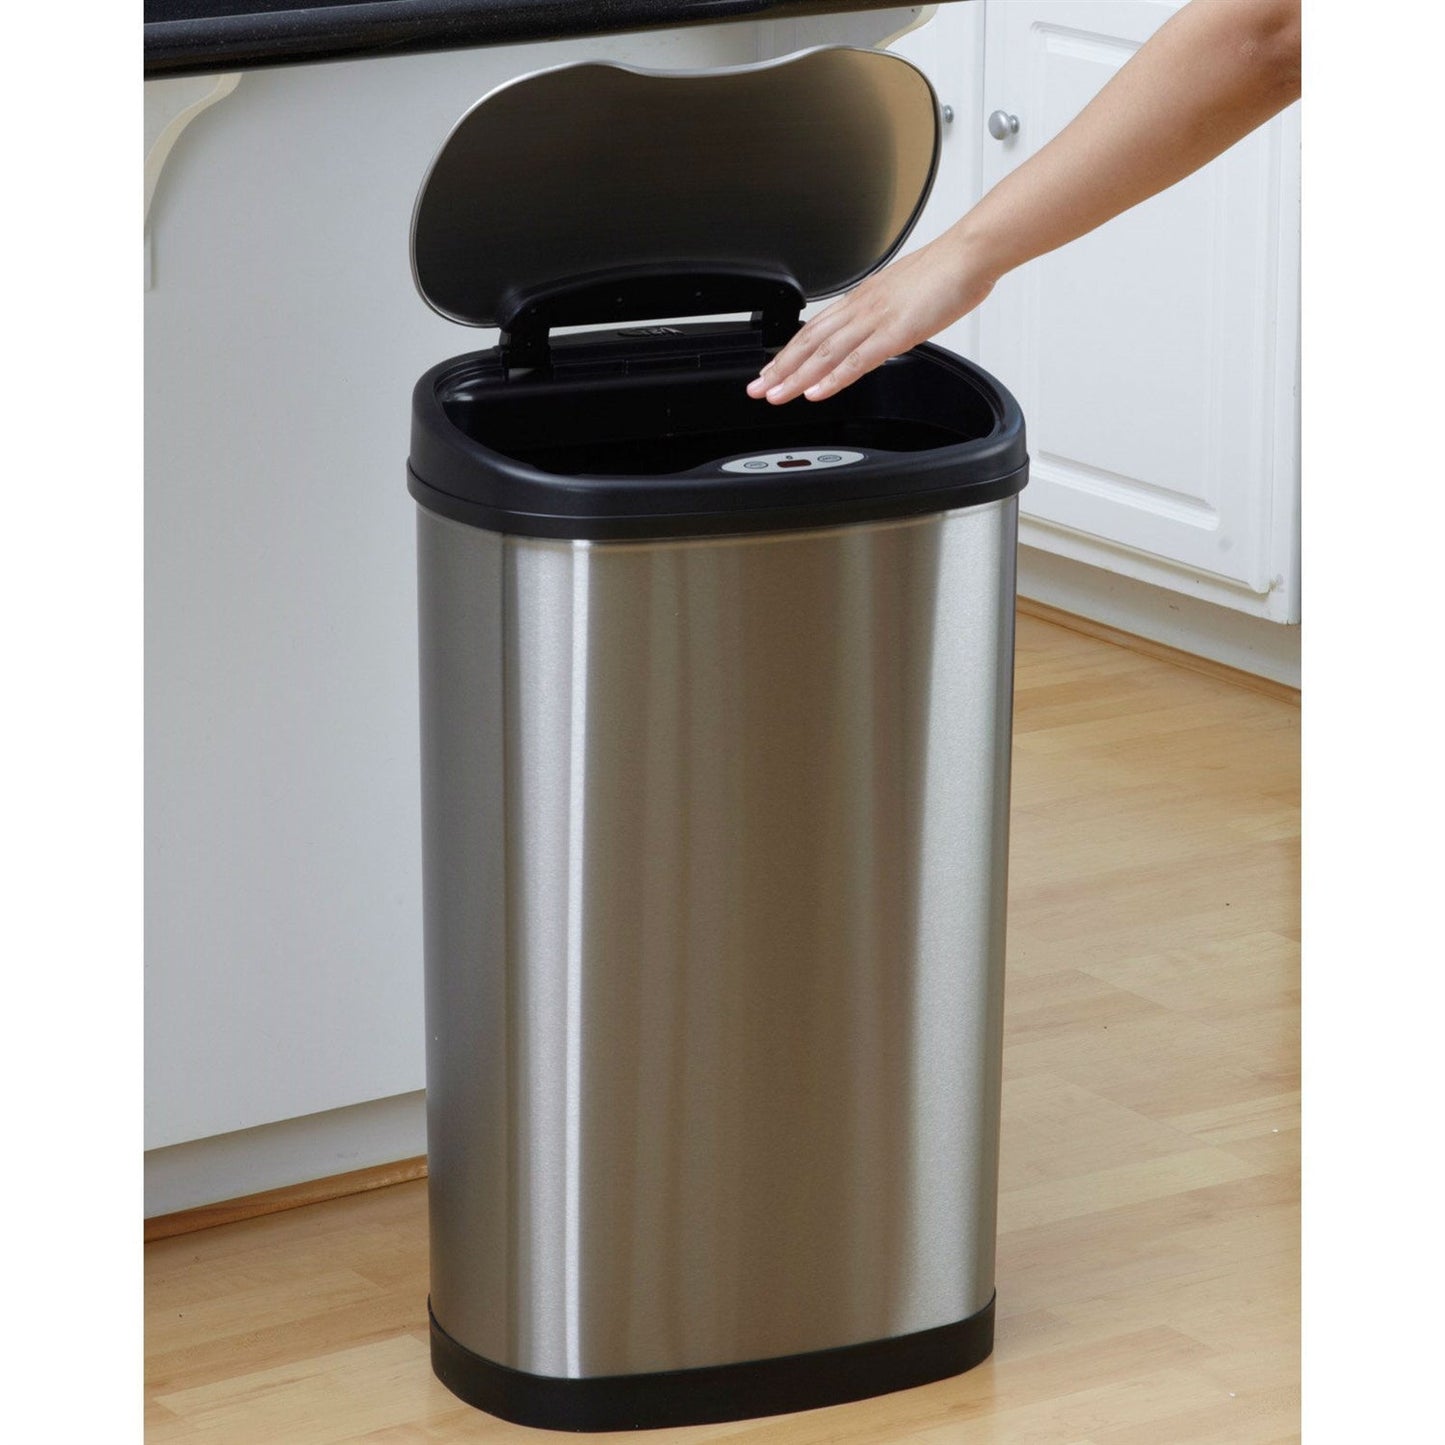 Kitchen > Trash Cans & Recycle Bins - Stainless Steel 13 Gallon Touchless Kitchen Trash Can